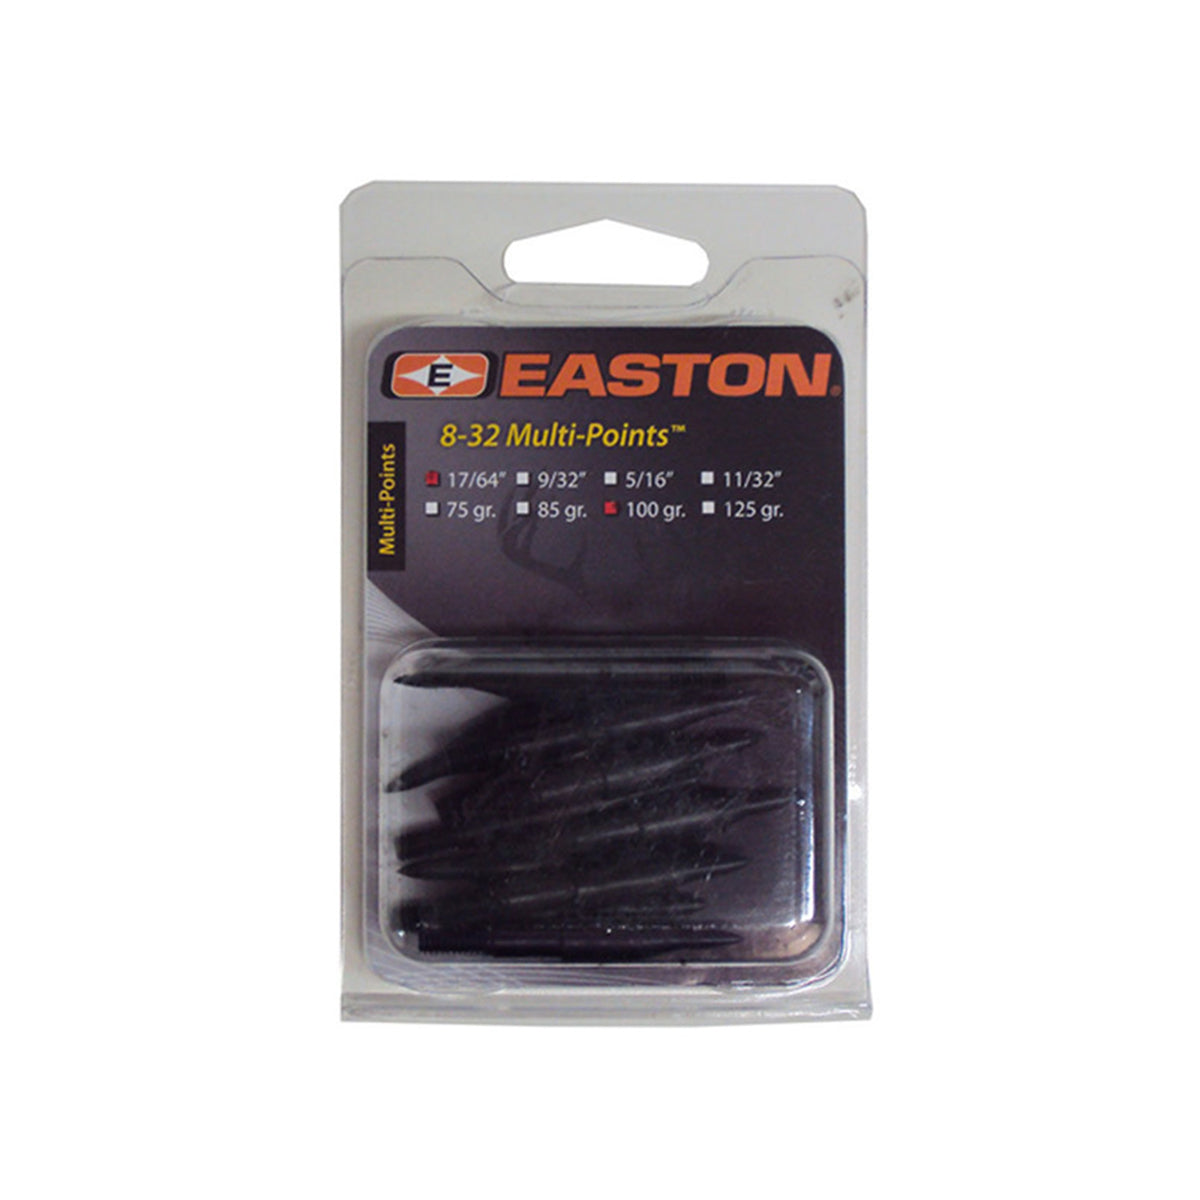 Easton Multi Points 17/64 Field Points - 12 Count in Easton Multi Points 17/64 by Easton | Archery - goHUNT Shop by GOHUNT | Easton - GOHUNT Shop